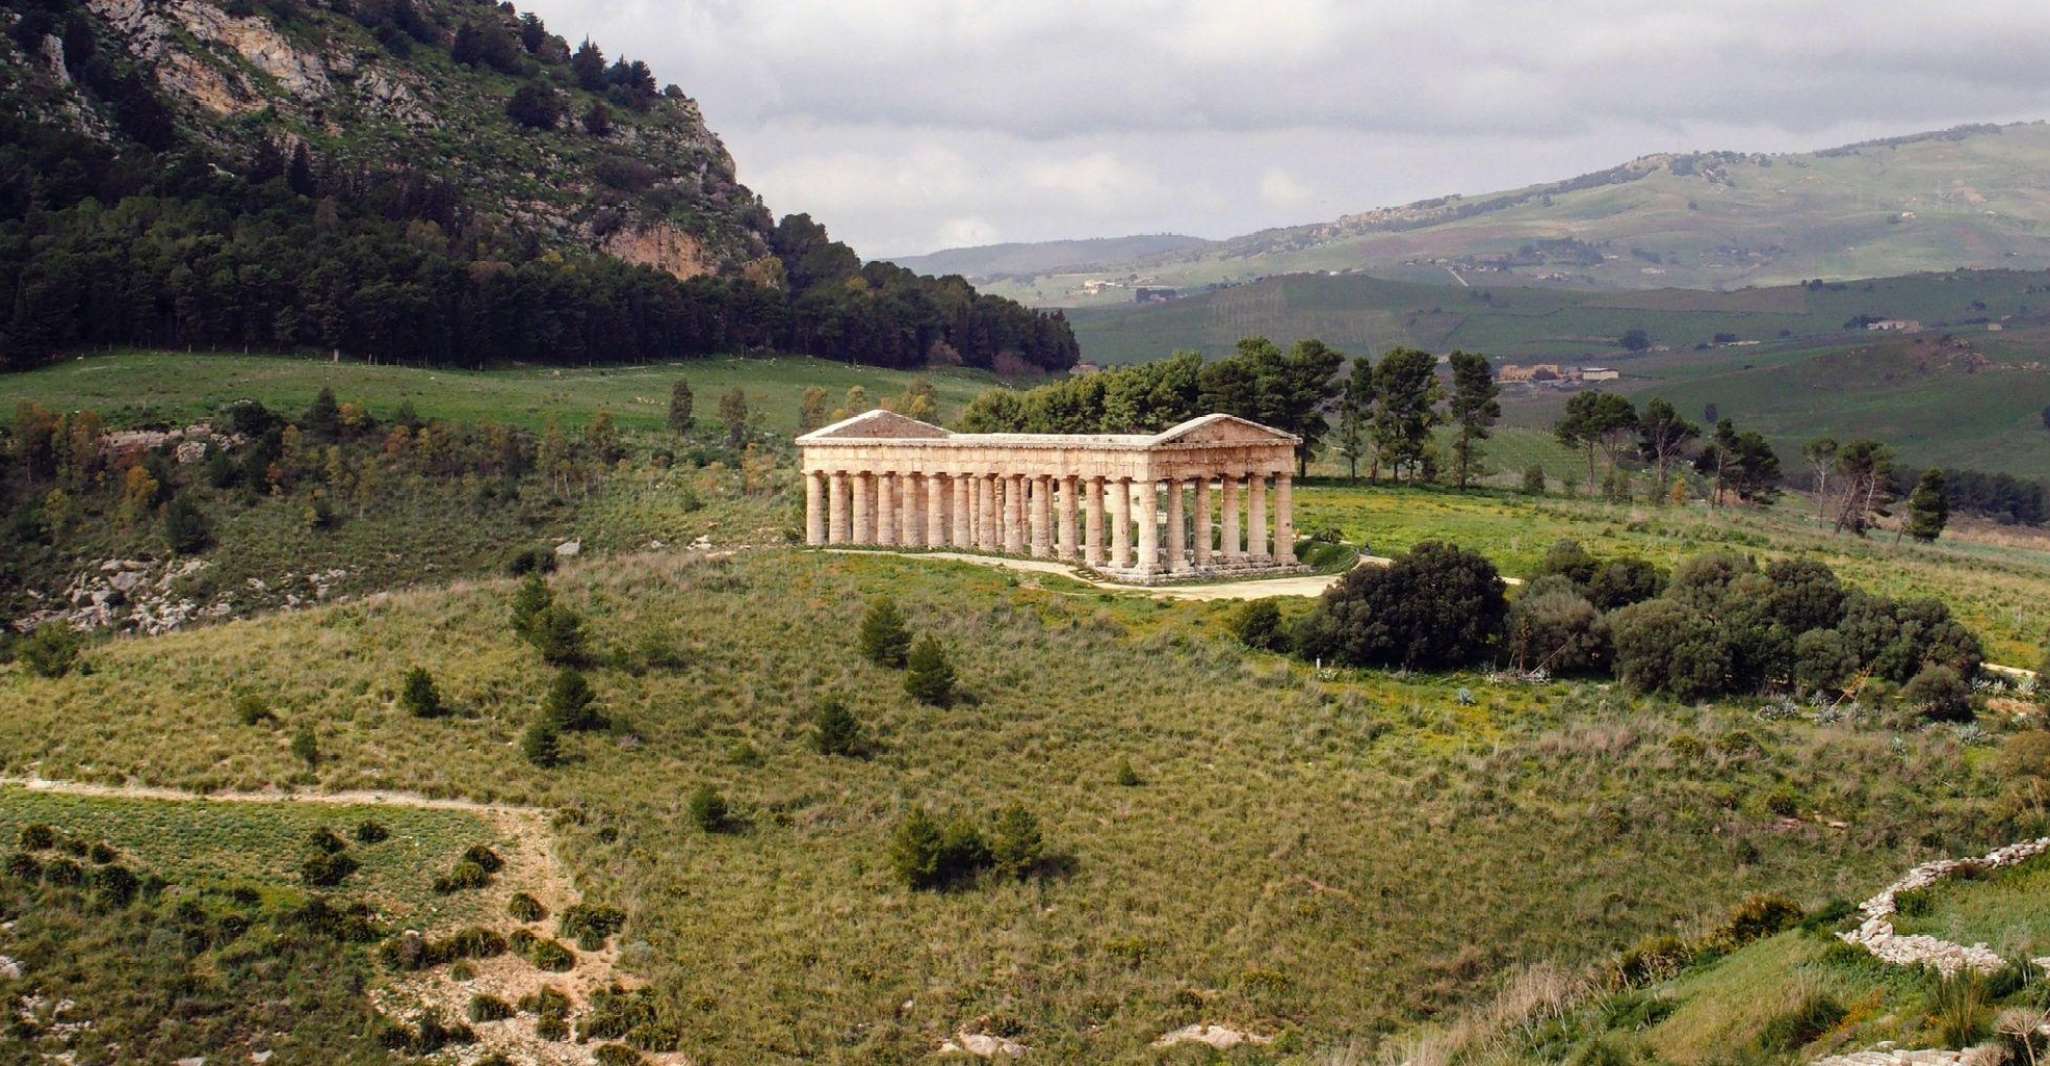 Visit Segesta every afternoon from Palermo - Housity